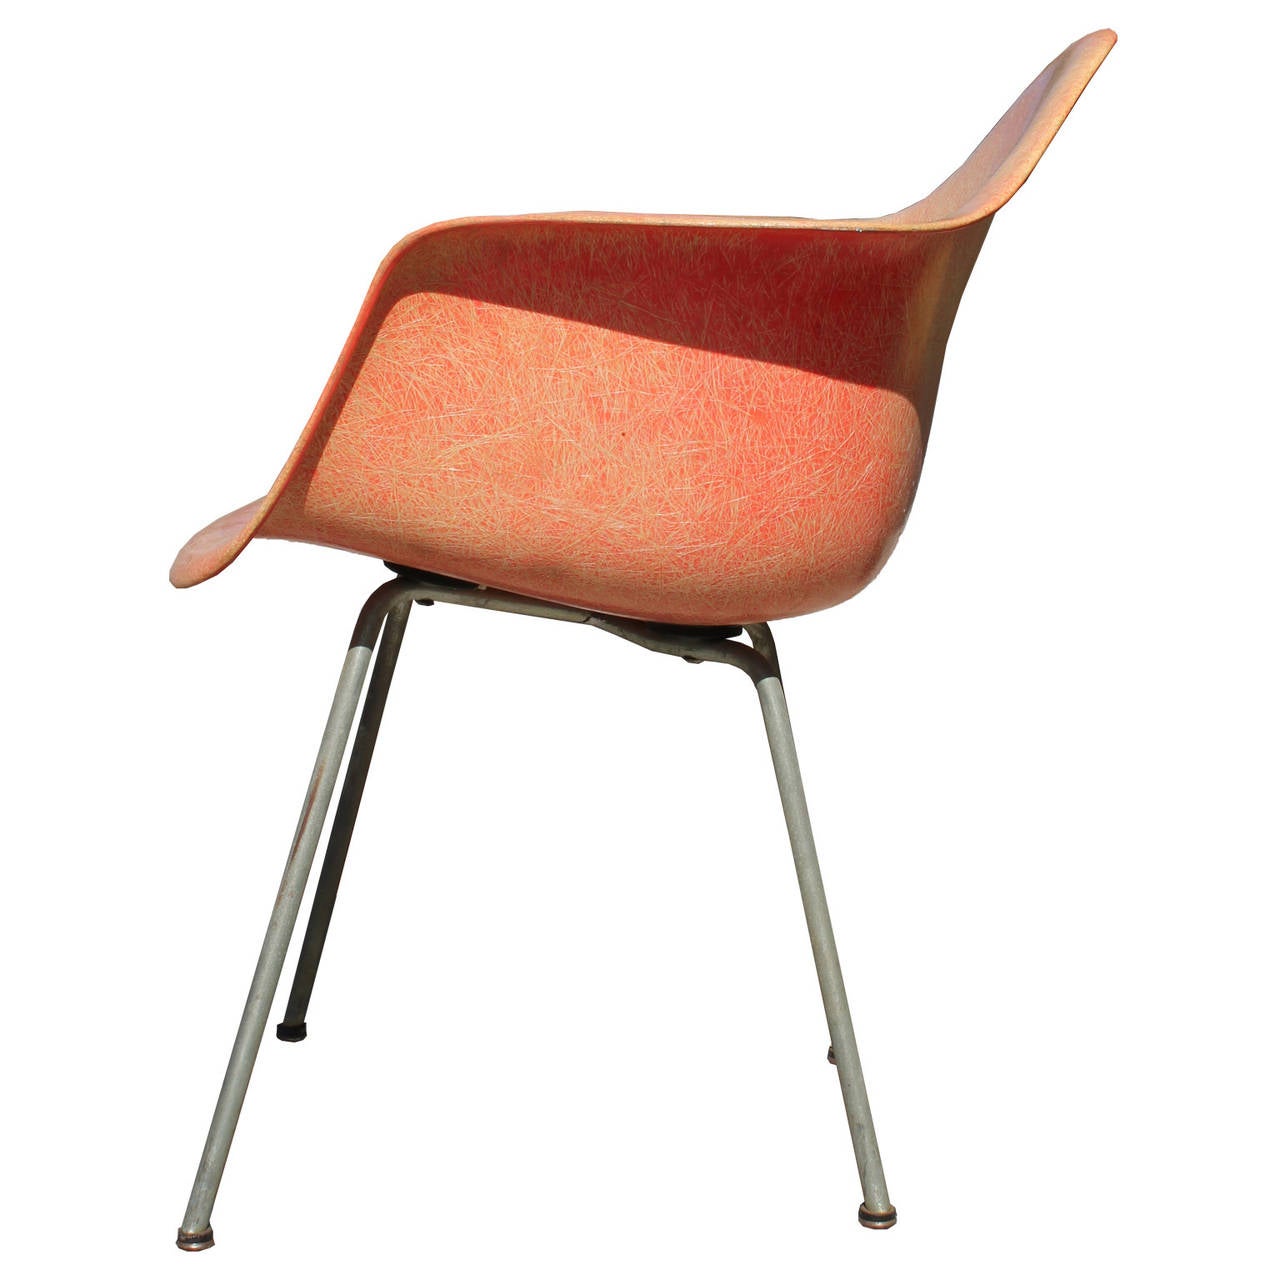 salmon colored chairs